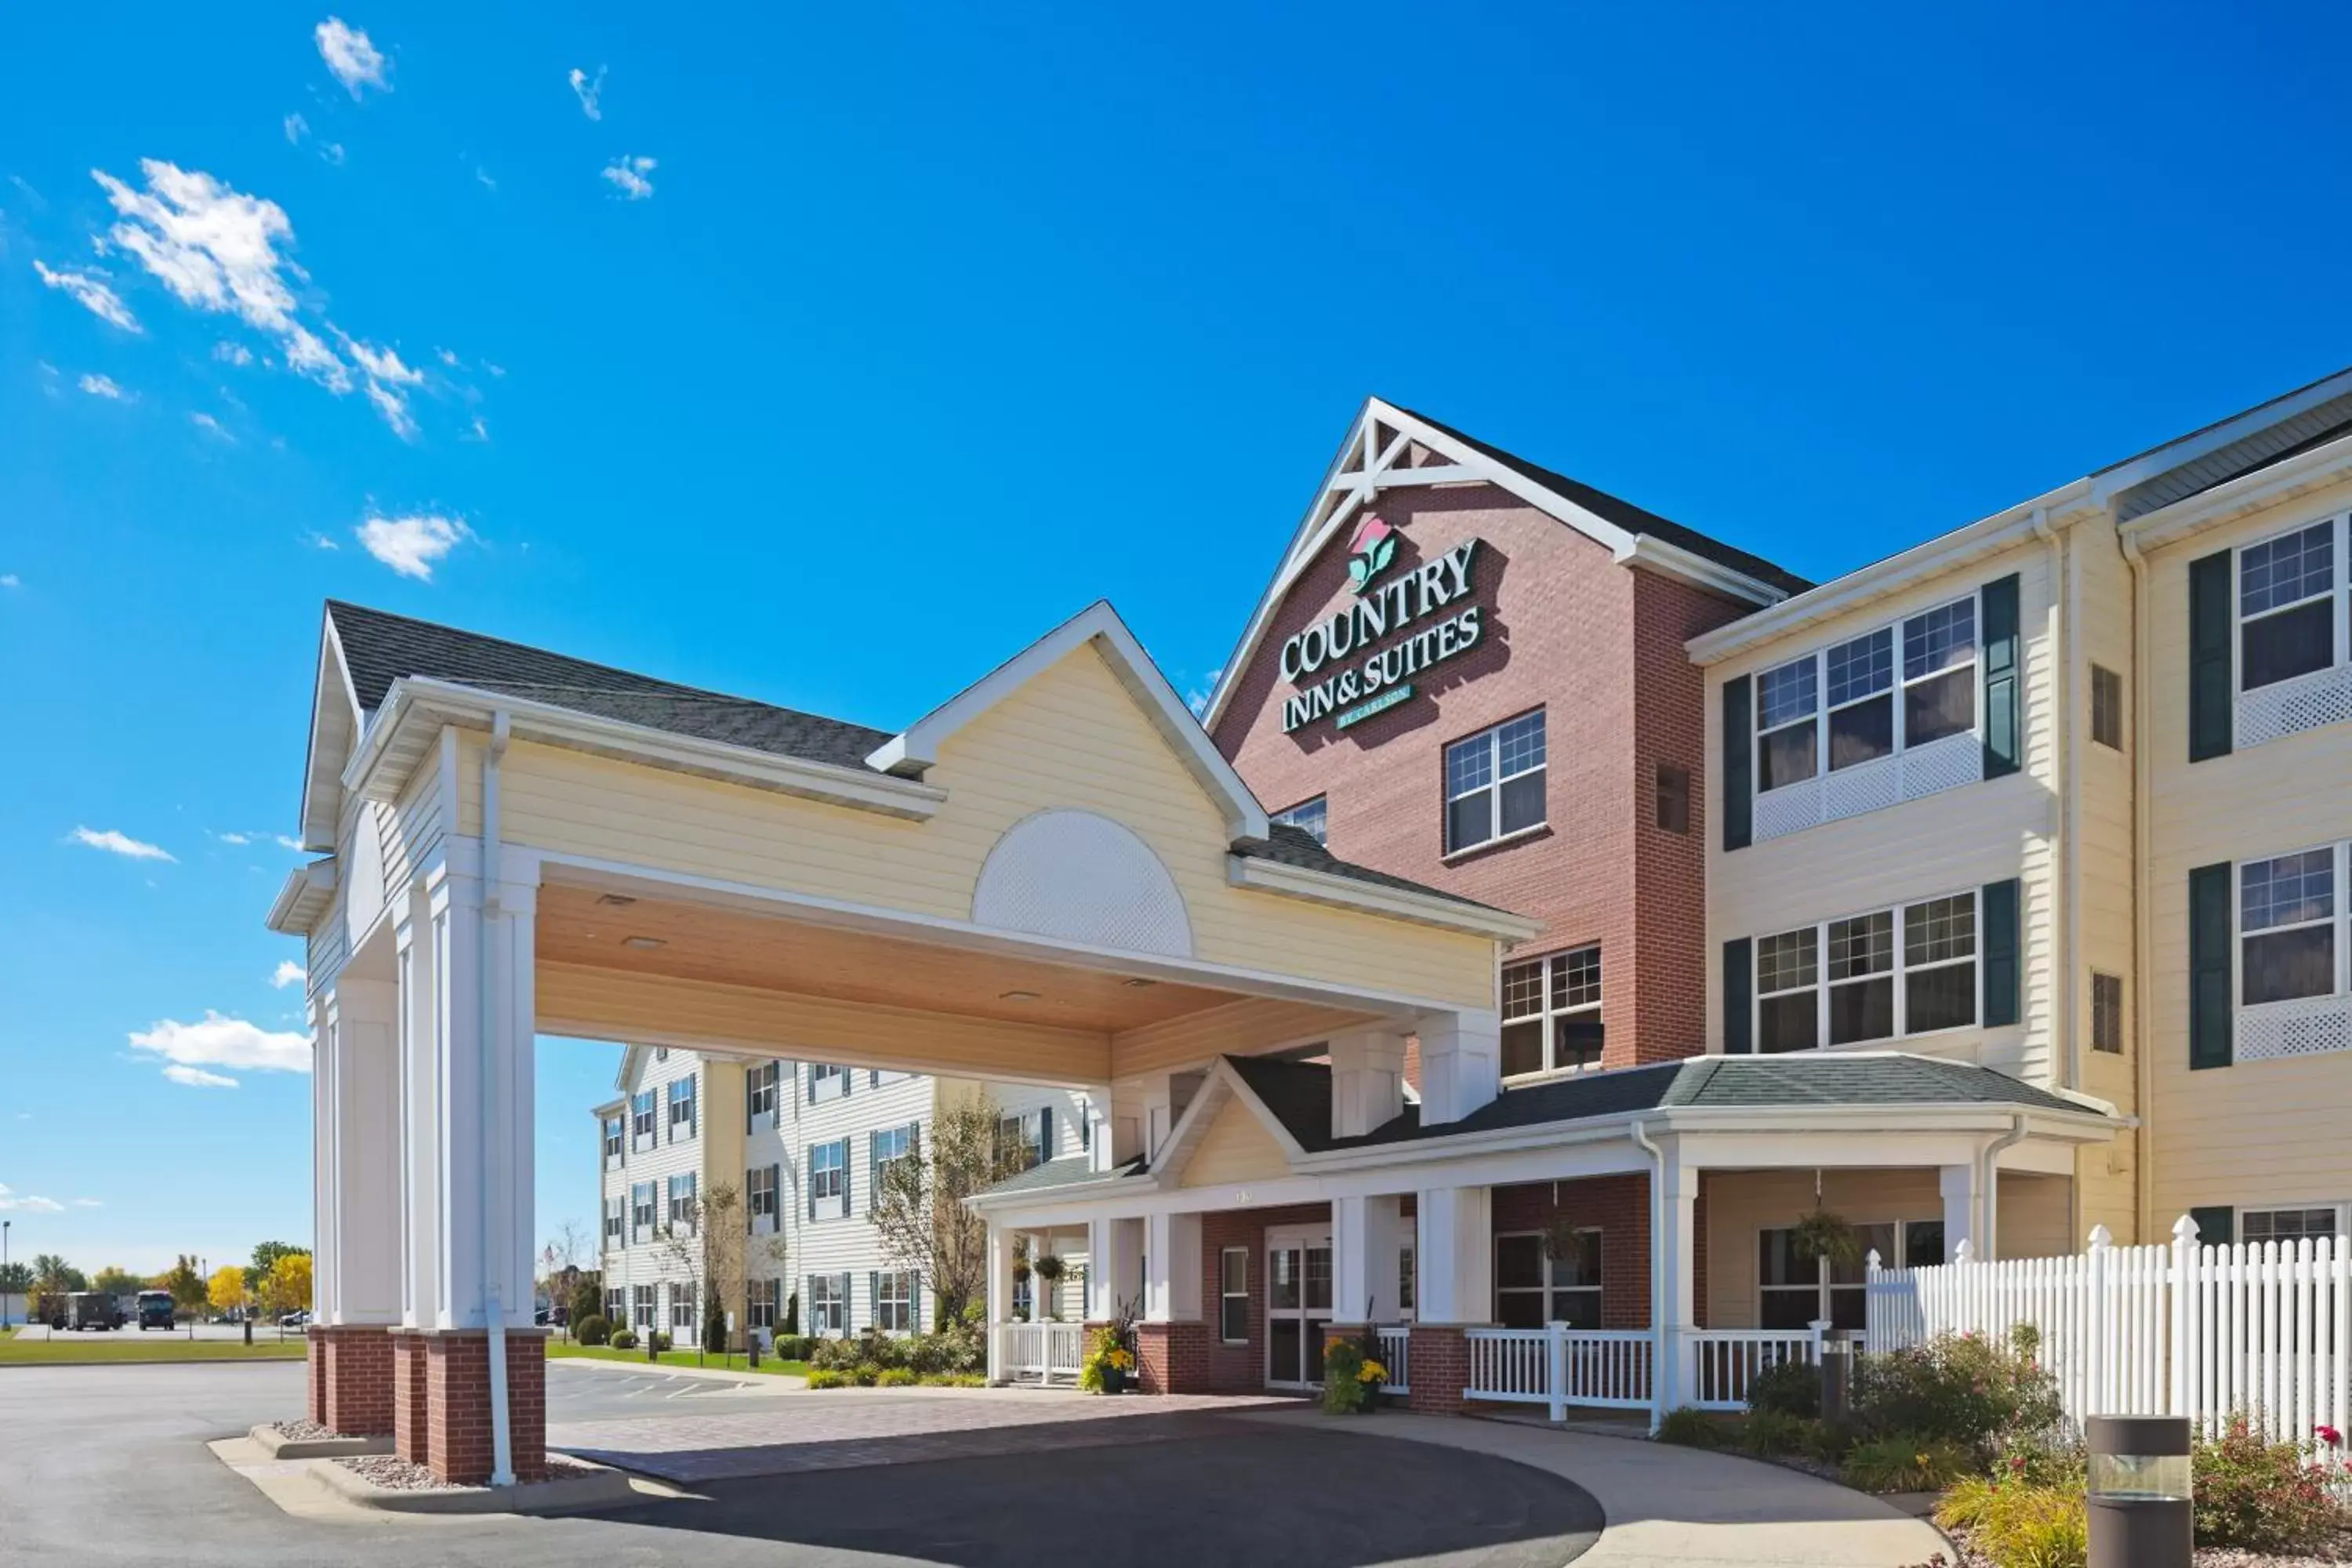 Facade/entrance, Property Building in Country Inn & Suites by Radisson, Appleton North, WI